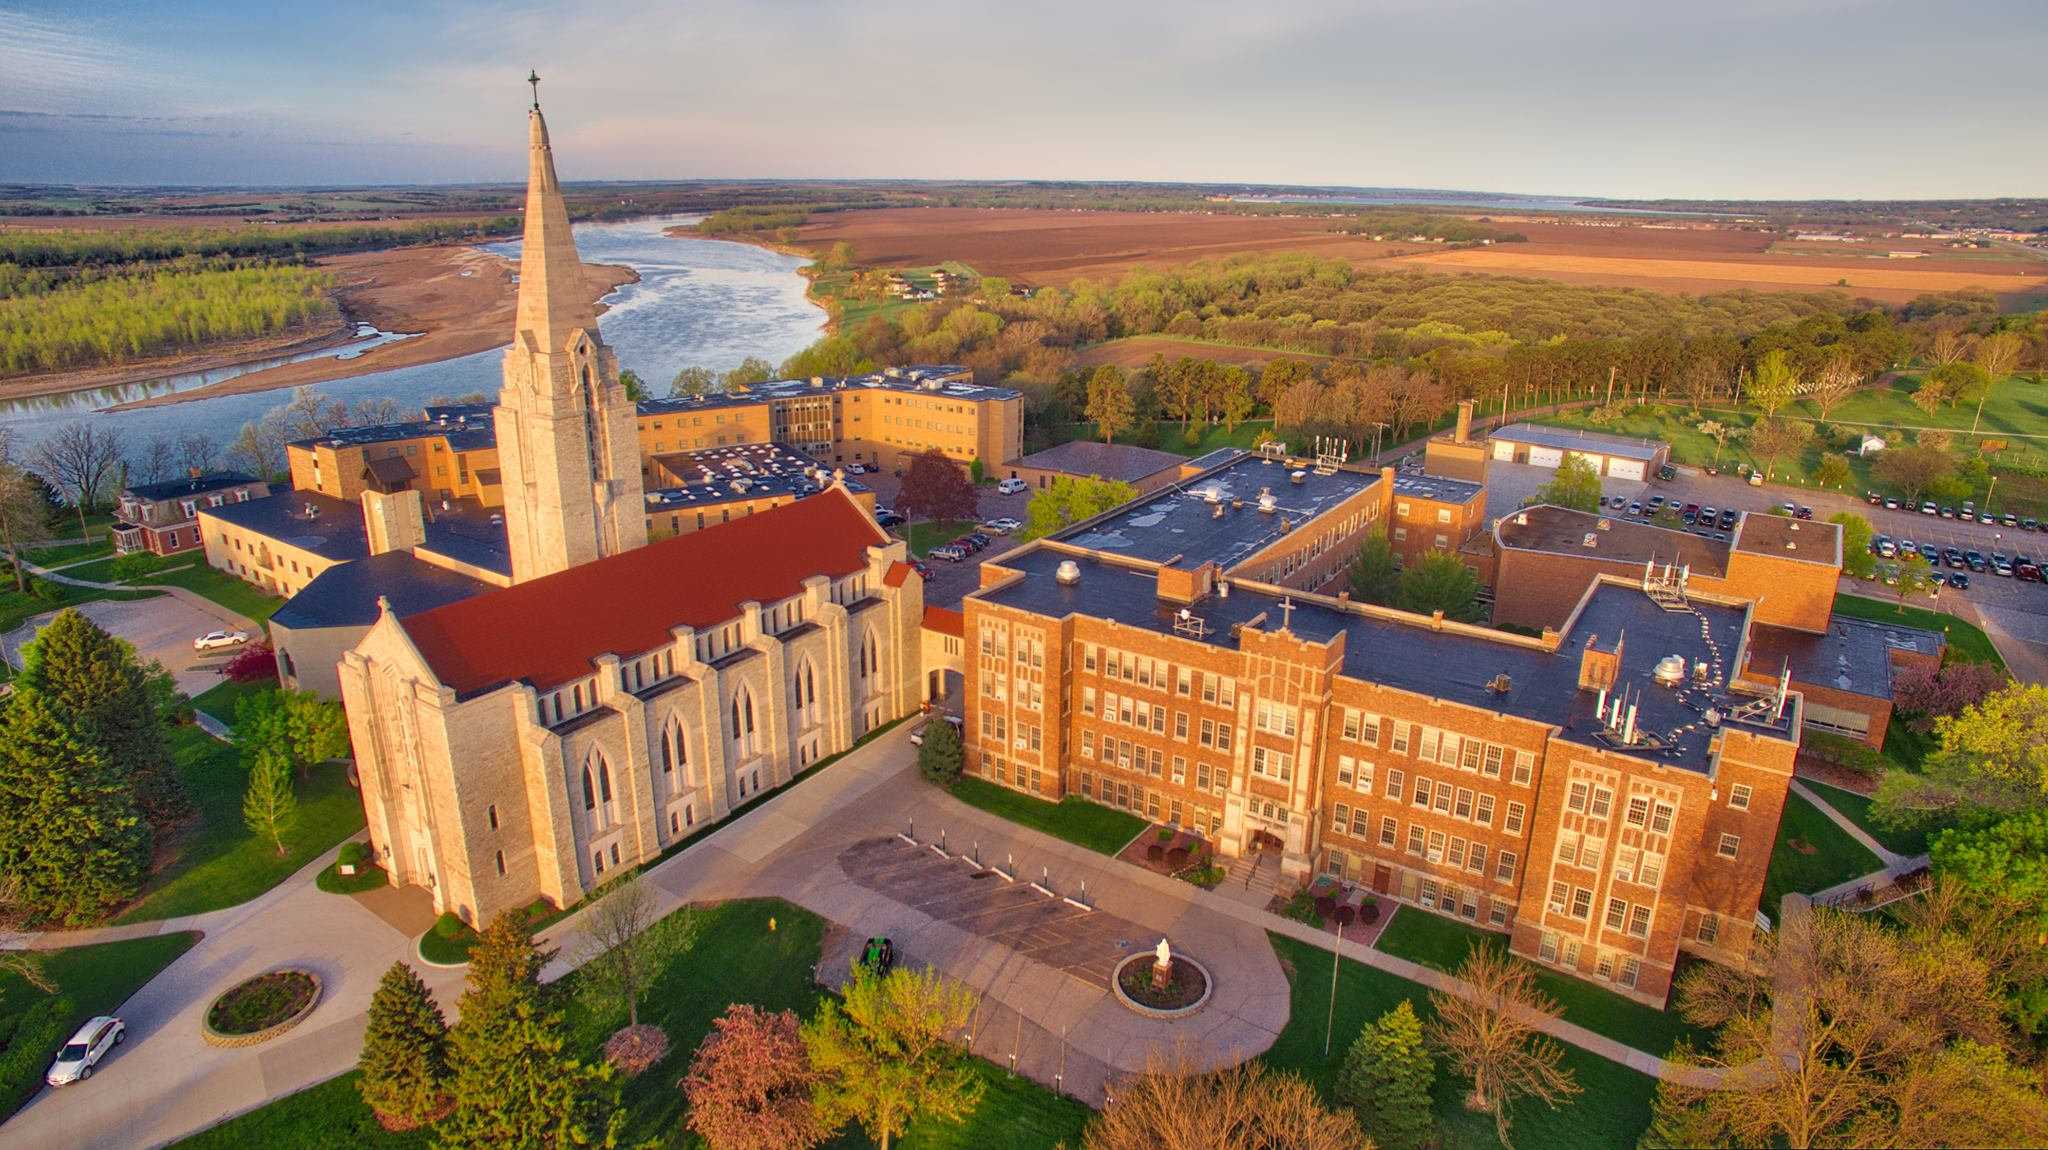 Mount Marty College